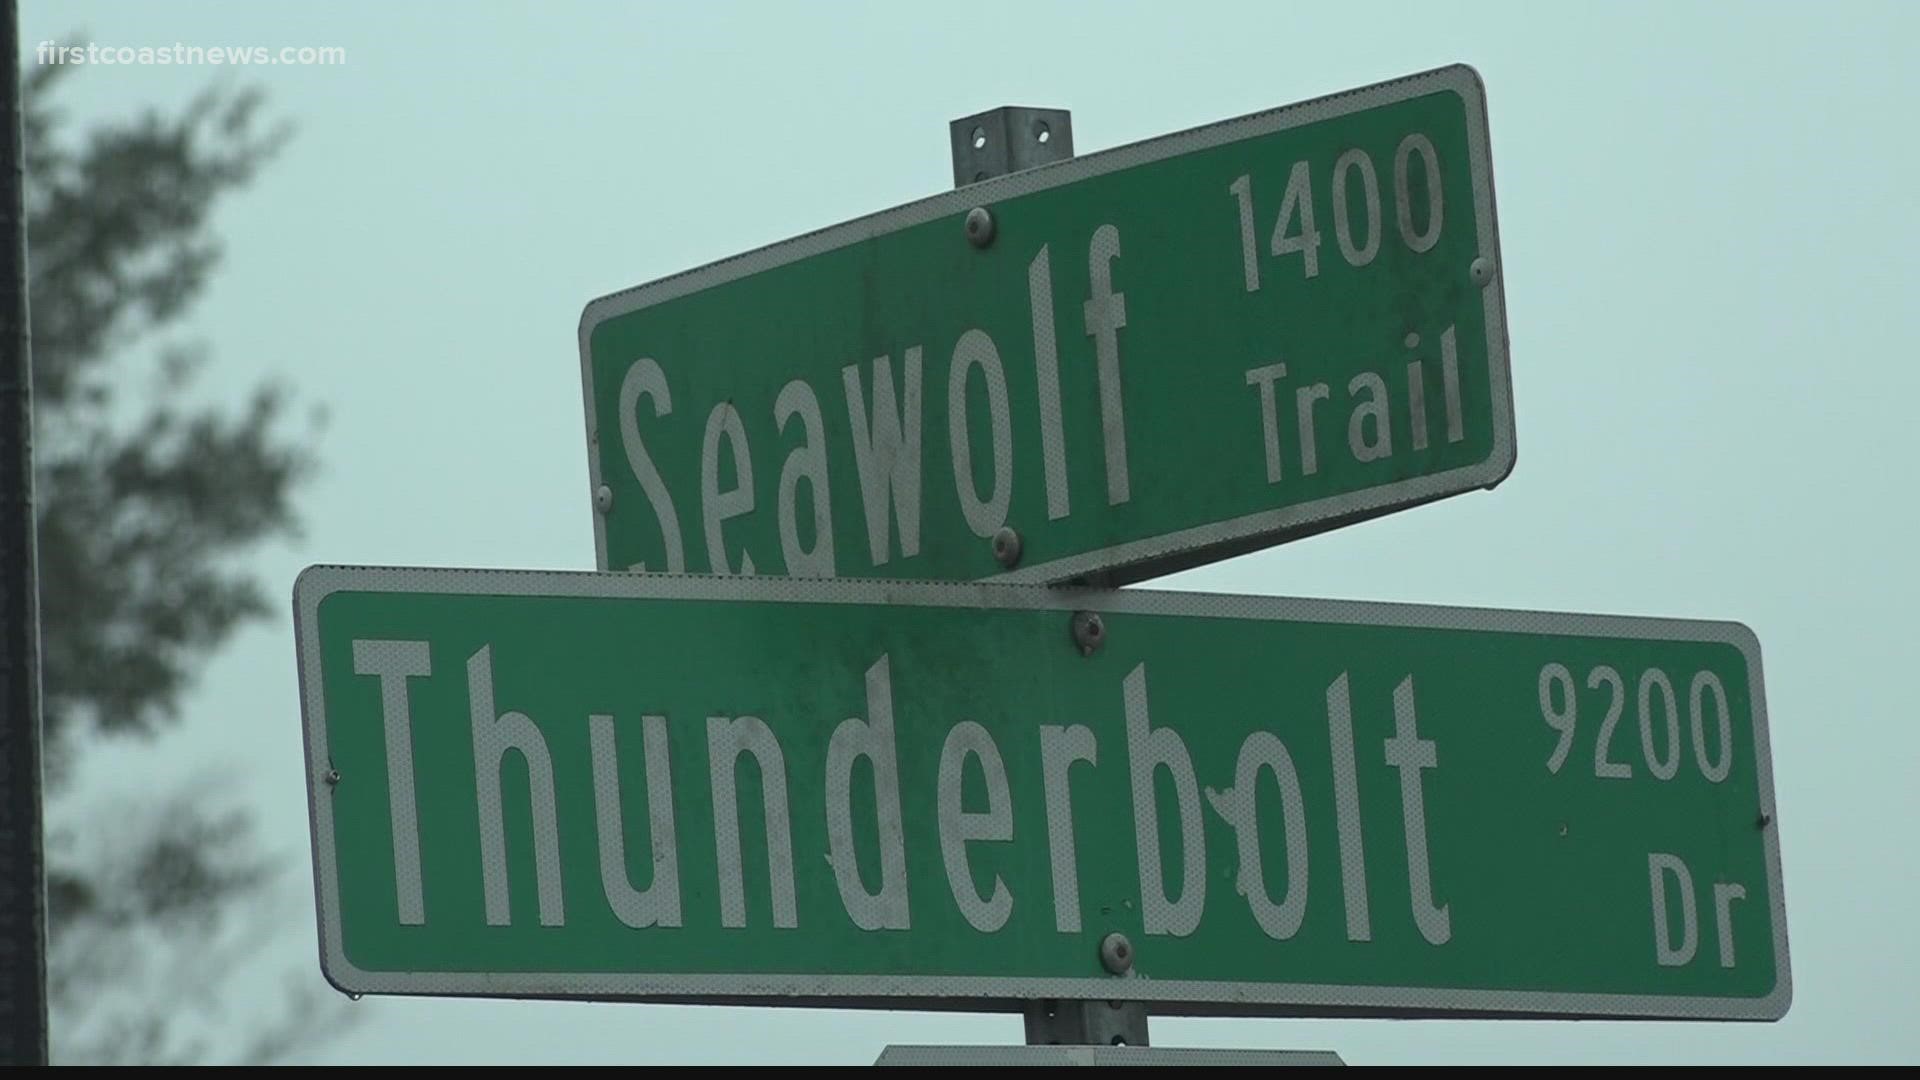 According to the Jacksonville Sheriff's Office, the shooting happened at about 12:49 a.m. on Seawolf Trail North.